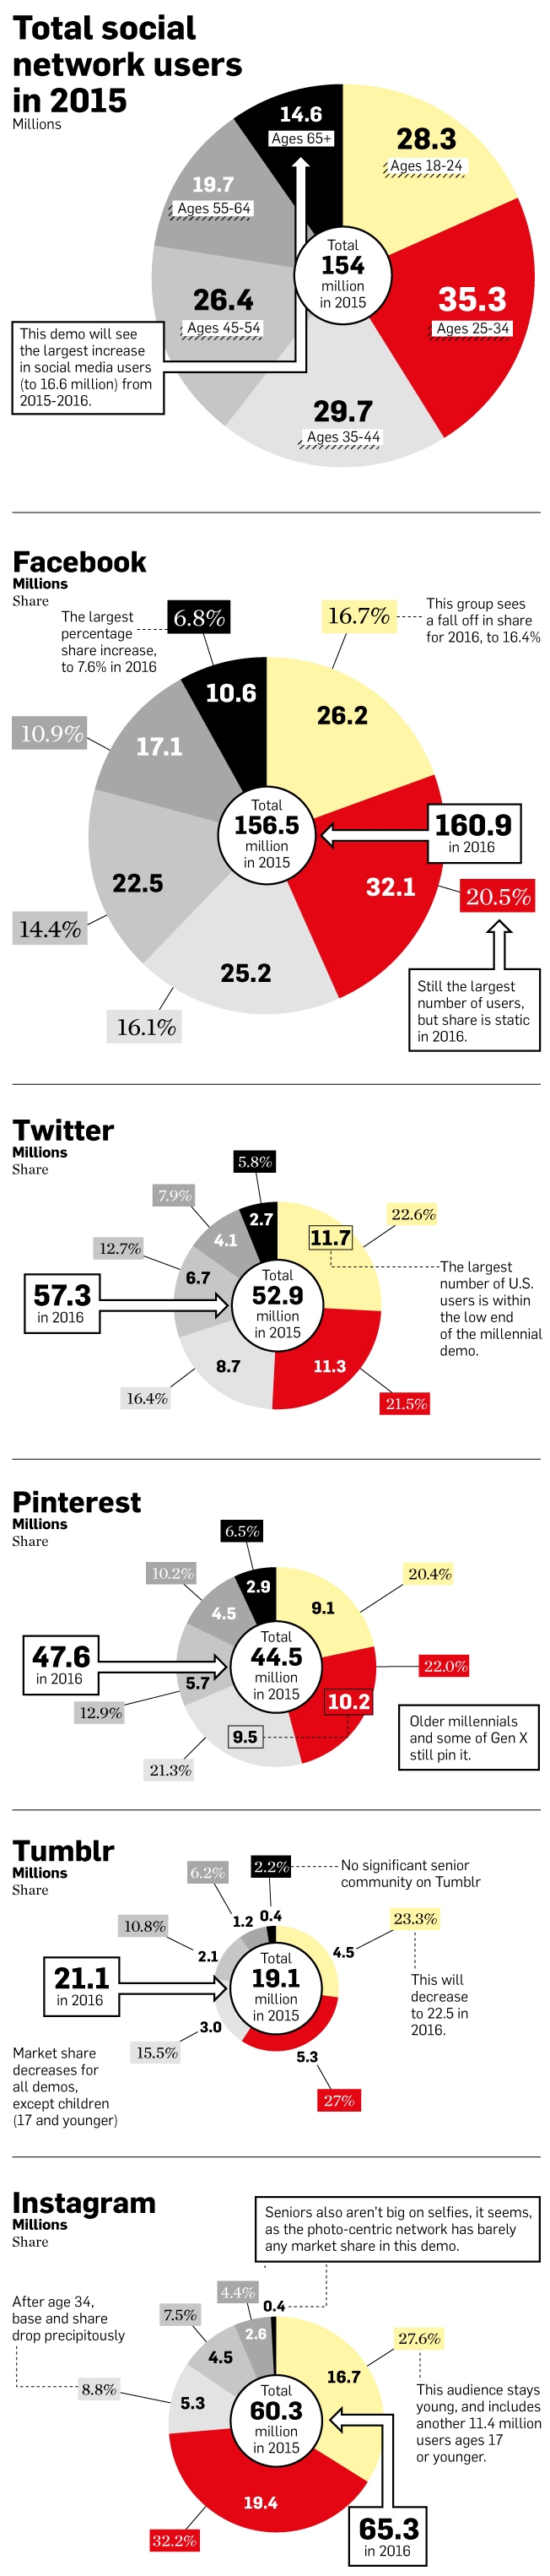 The New Social Stratosphere: Who Is Using Facebook, Twitter, Pinterest, Tumblr and Instagram in 2015 and Beyond: Facebook's not dead, it’s just getting grayer